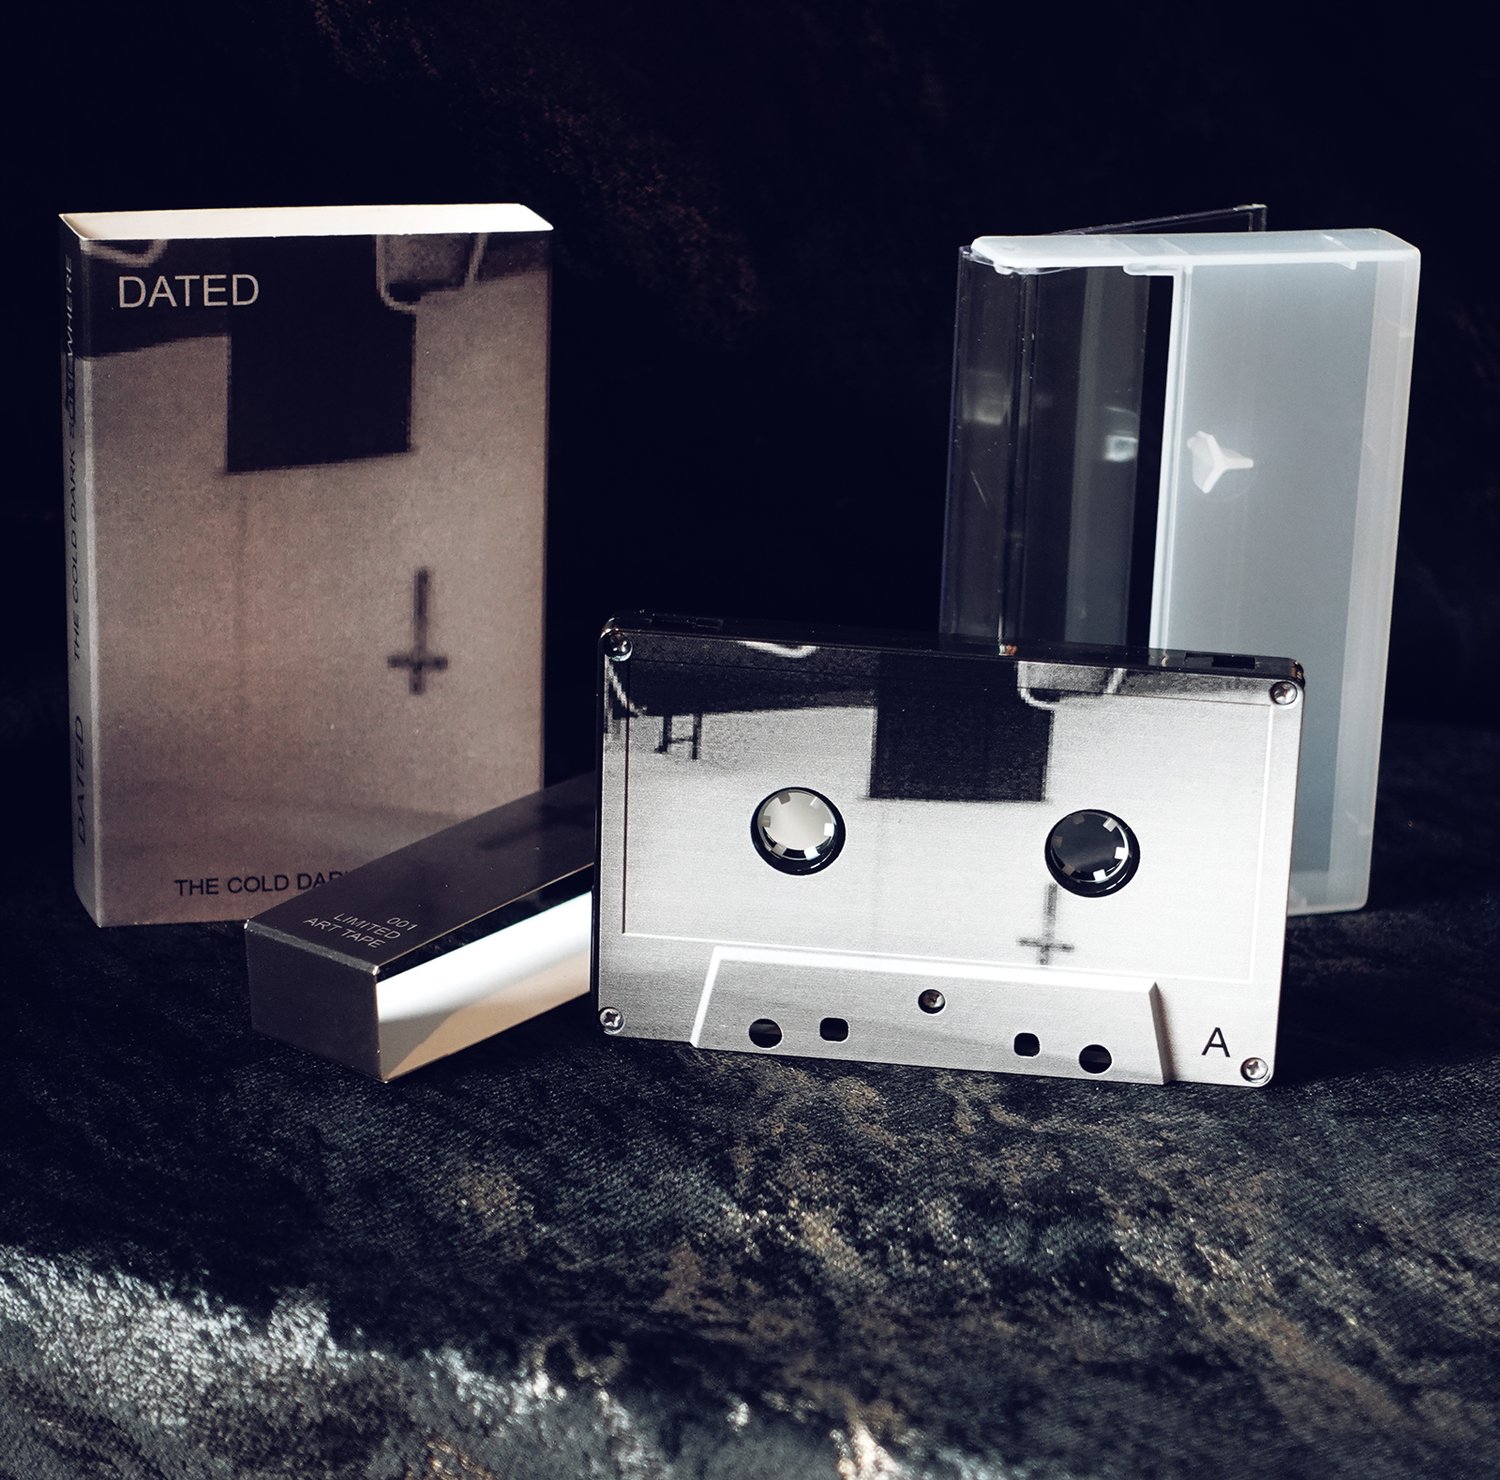 ART TAPE 001 - DATED - THE COLD DARK SOMEWHERE [100 COPIES] — ill-advised  records